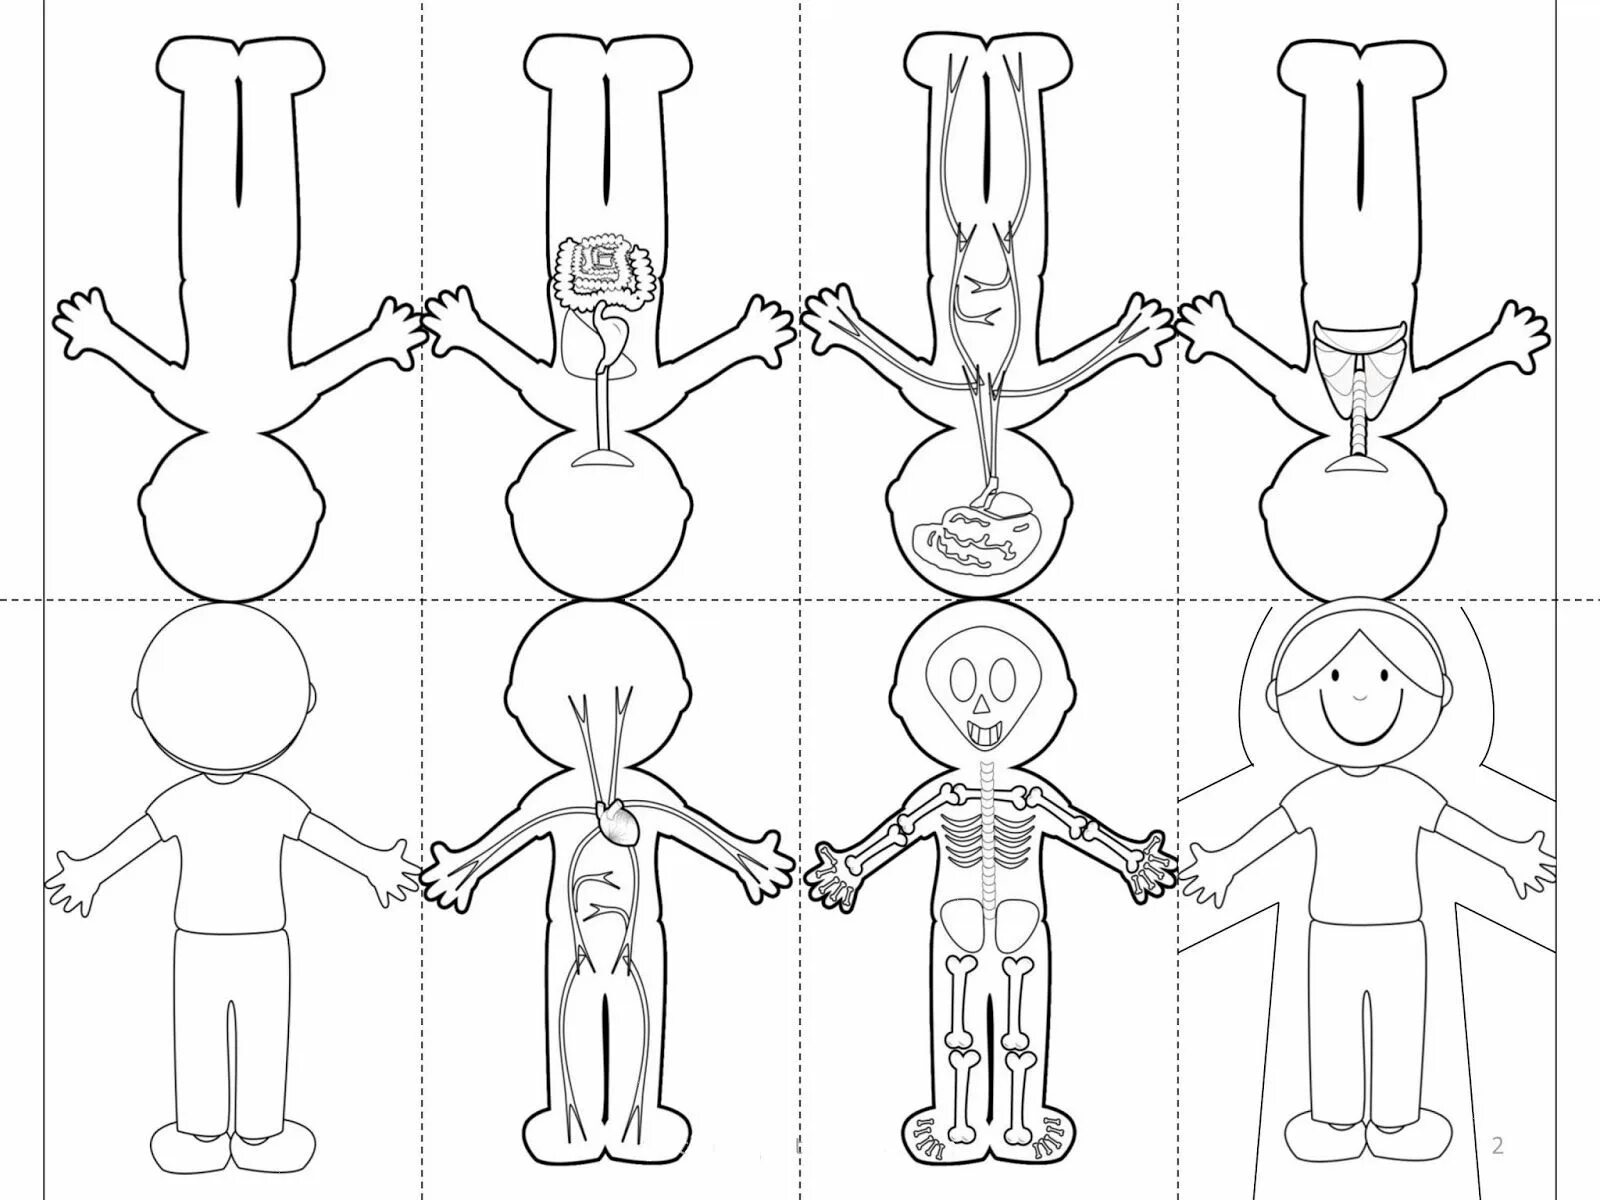 Colorful human structure coloring page for students